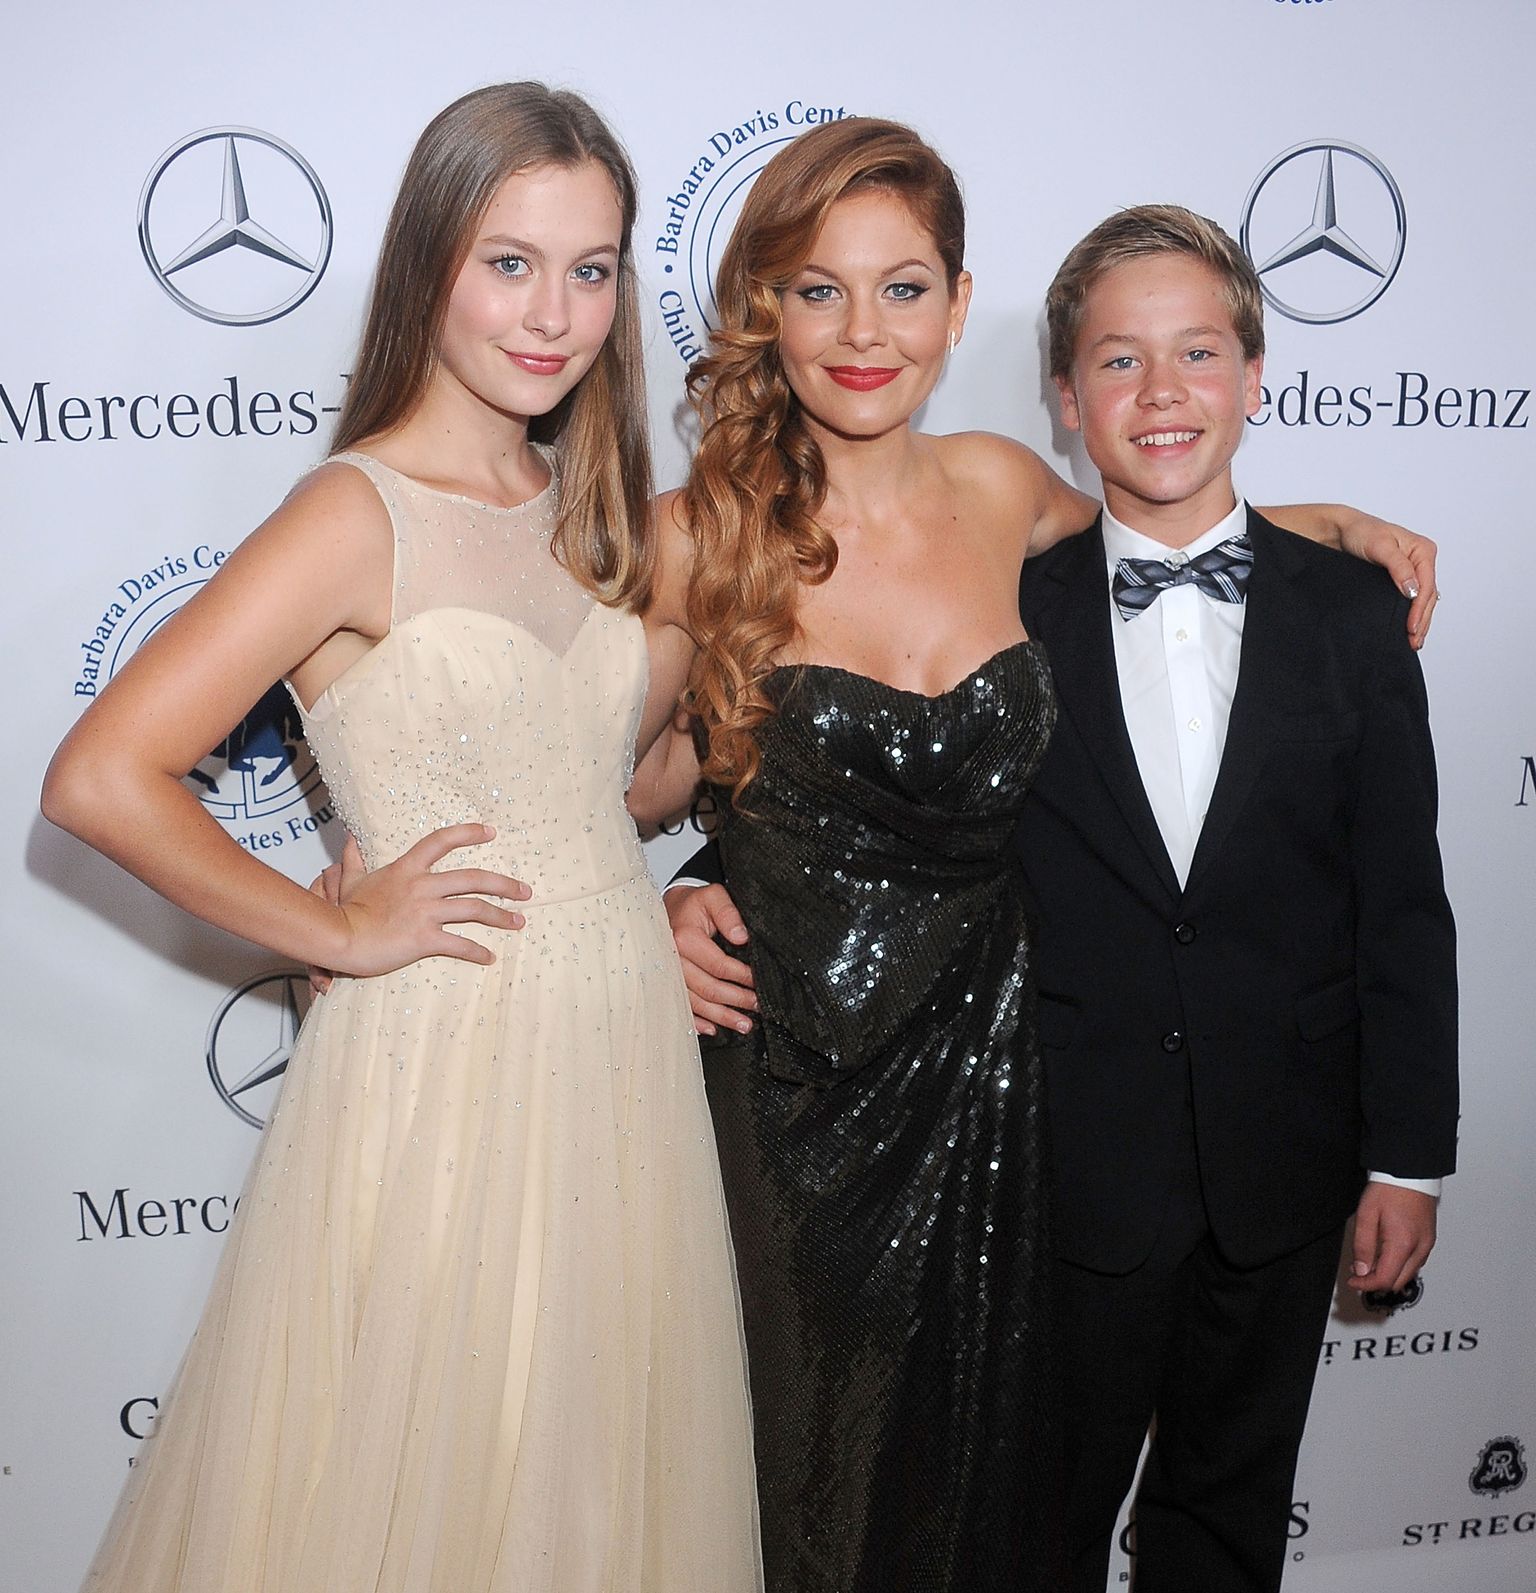  Candace Cameron Bure with son Lev and daughter Natasha at the 2014 Carousel Of Hope Ball in Beverly Hills, California | Source: Getty Images